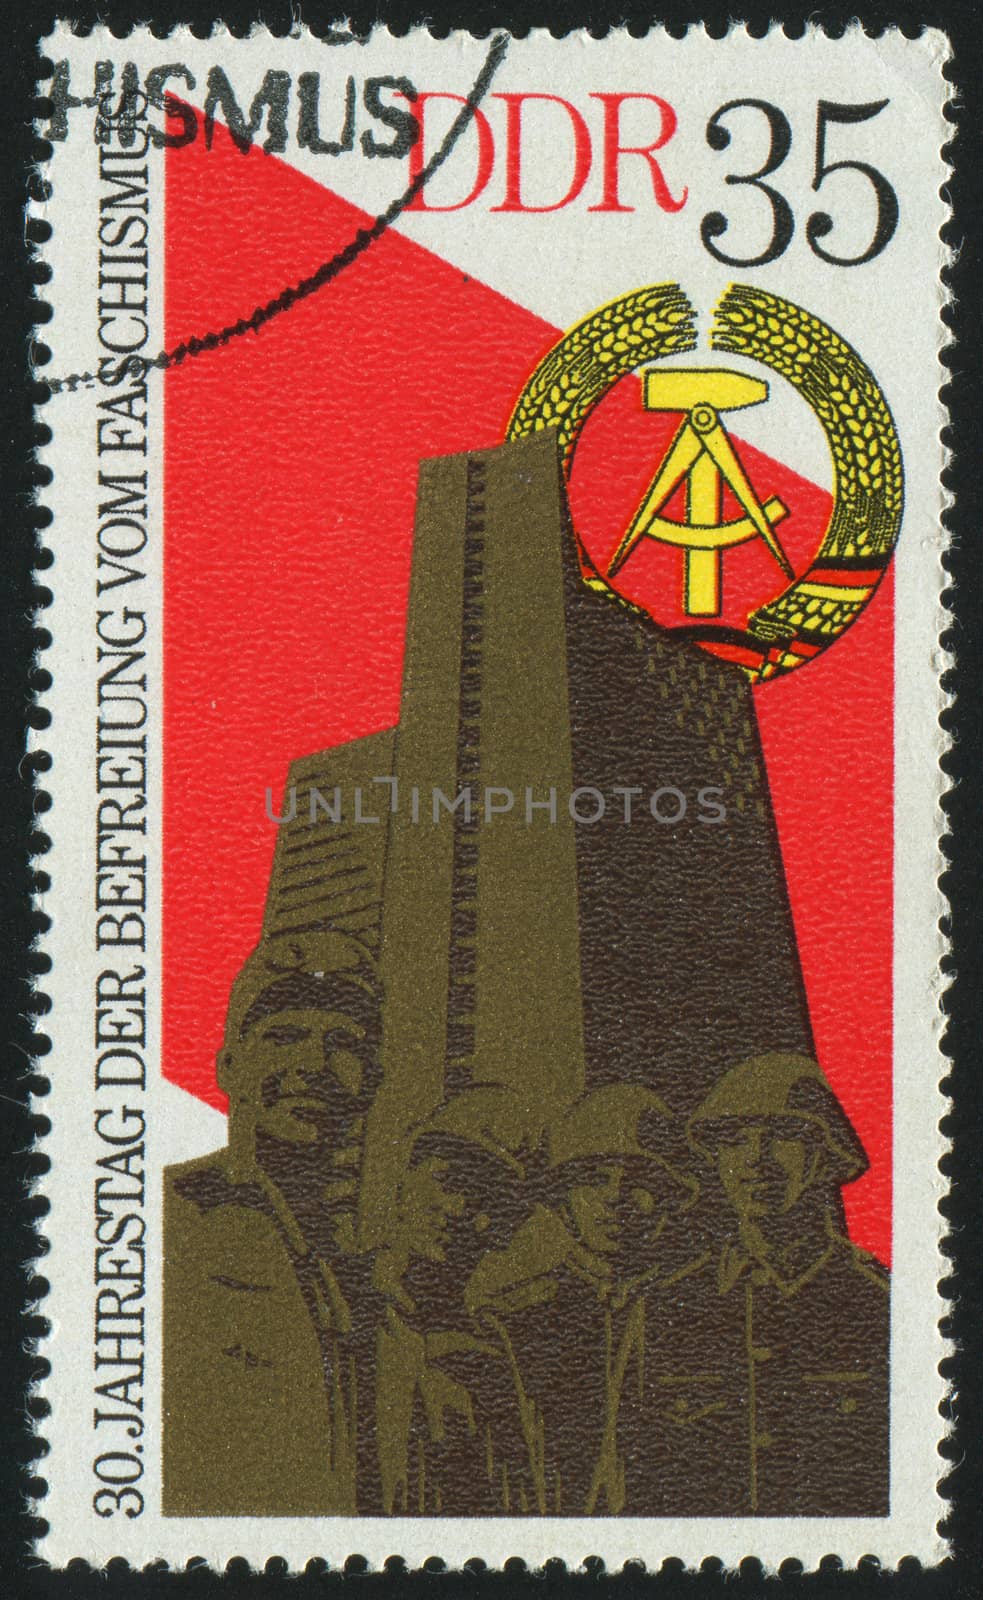 GERMANY - CIRCA 1975: stamp printed by Germany, shows Skyscraper and statue at Orenburg, circa 1975.